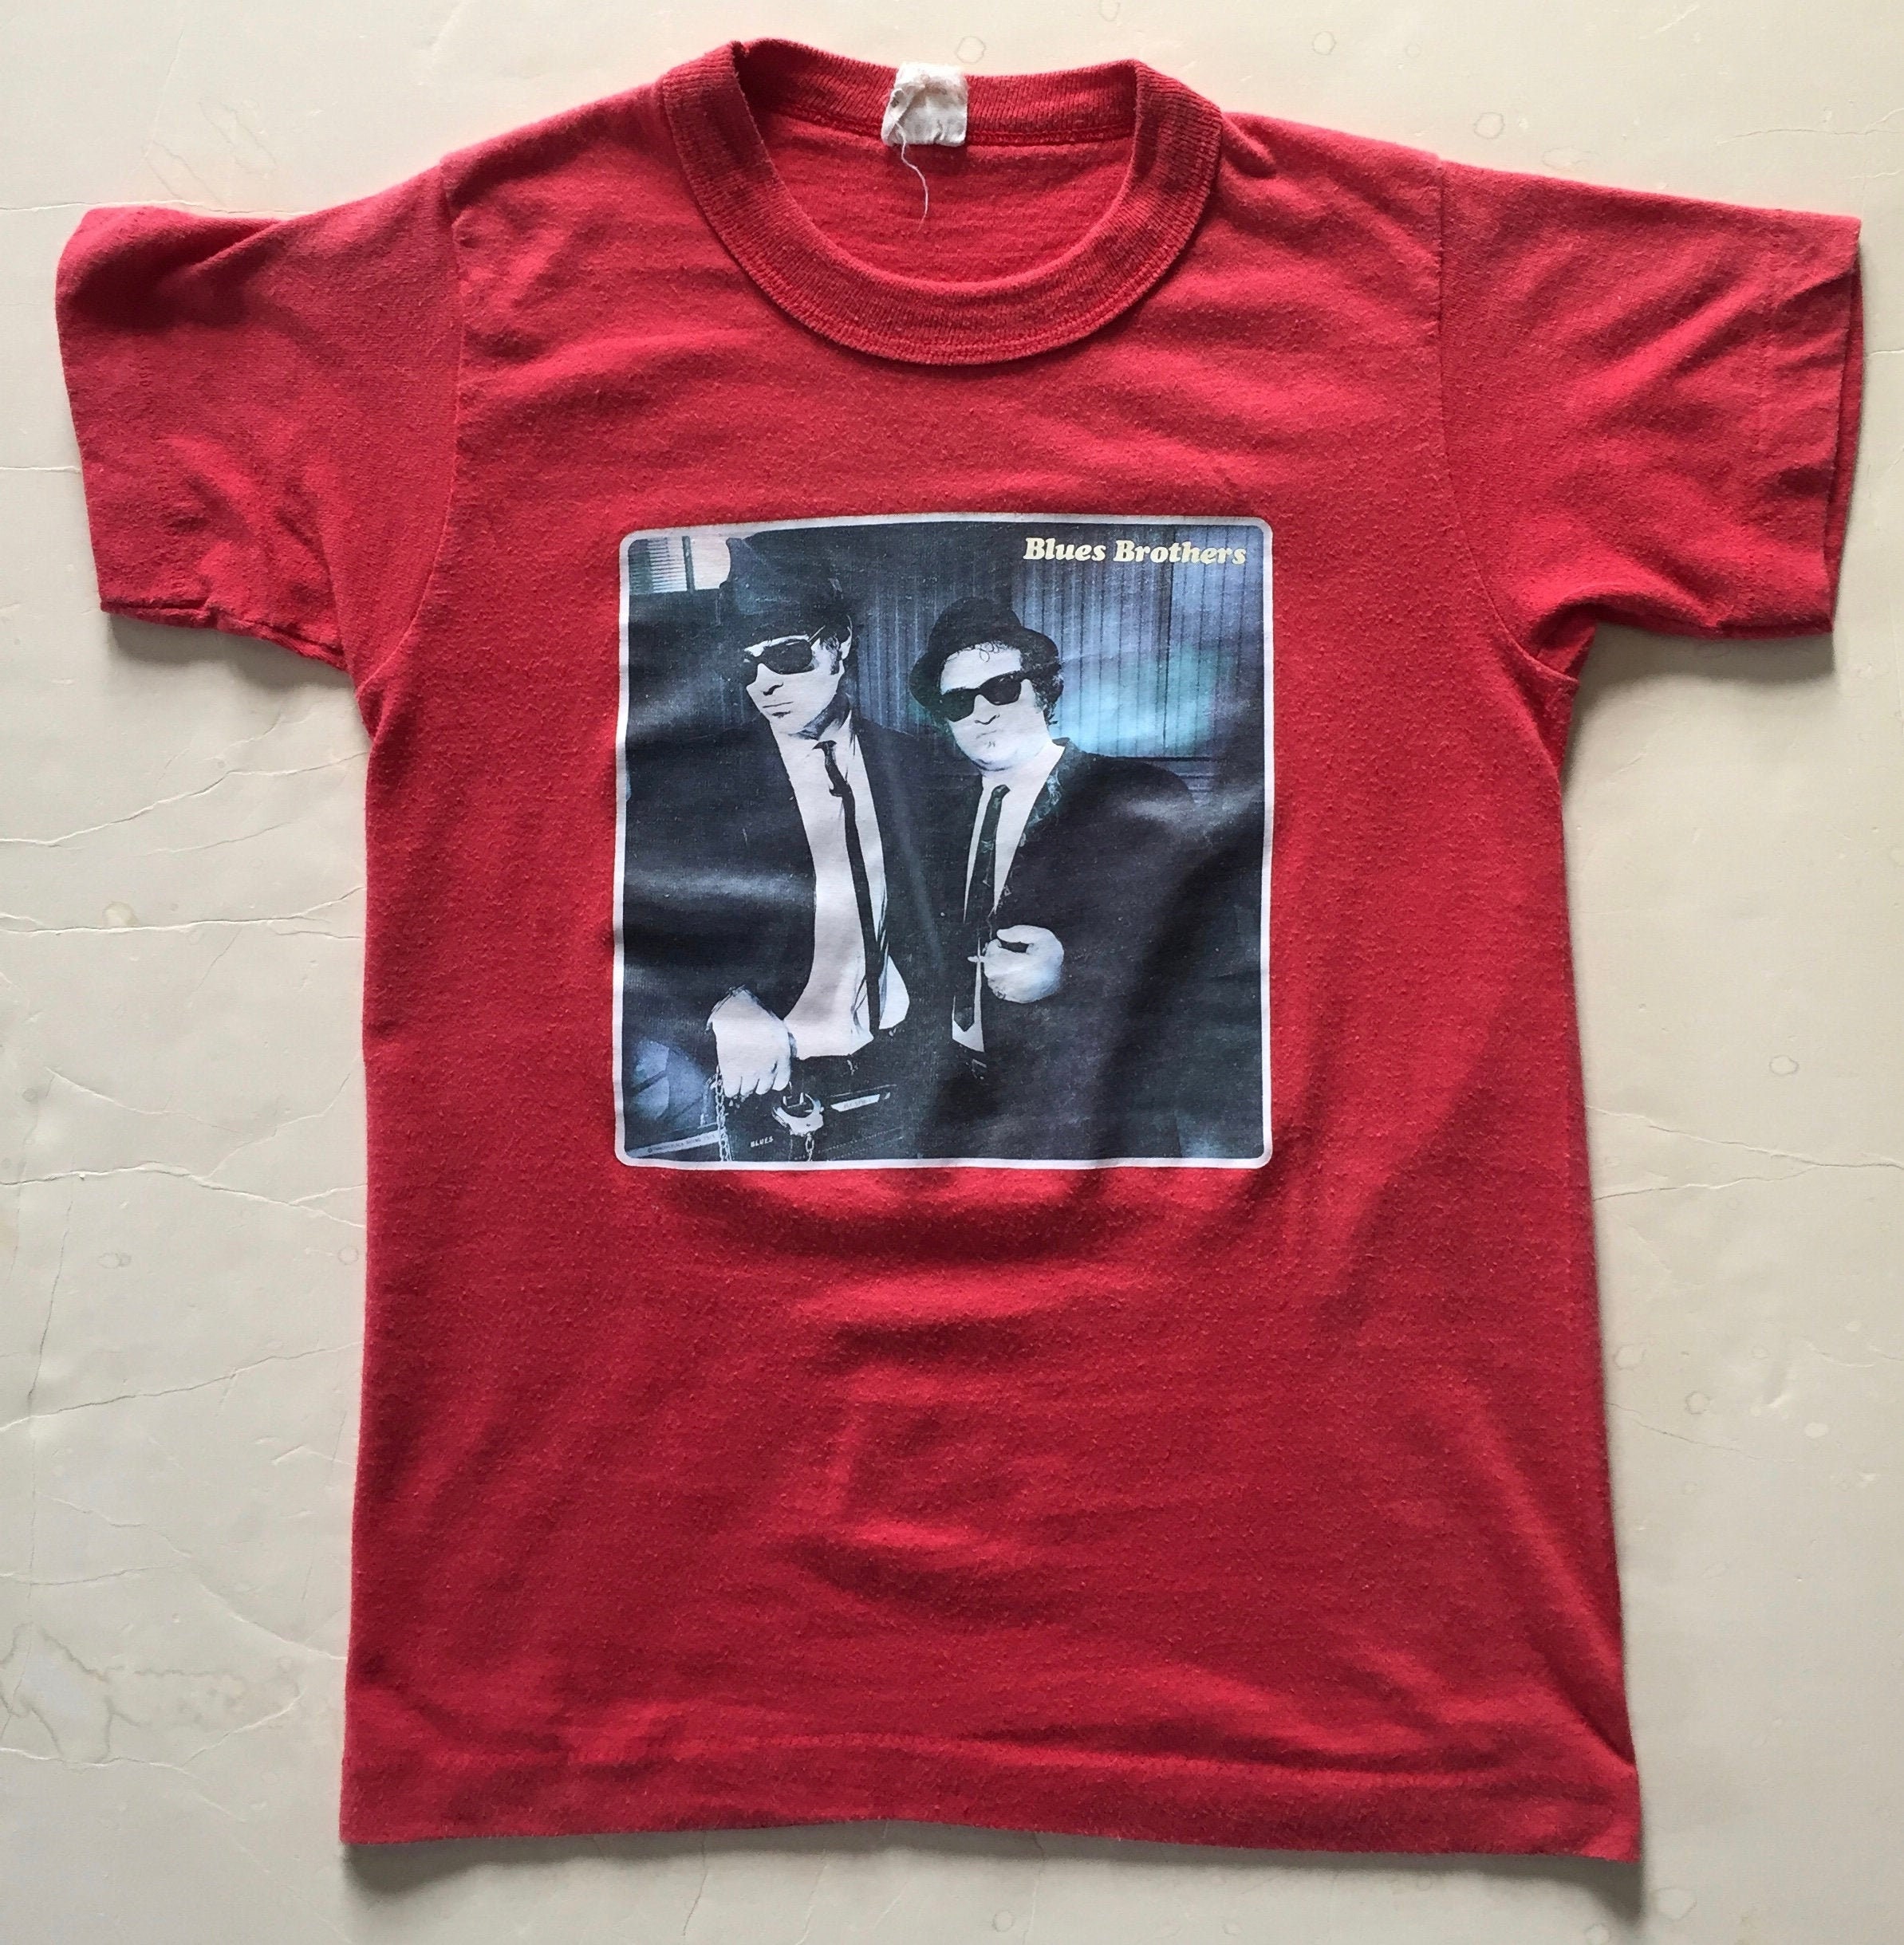 Blues Brothers T Shirt Vintage 70s 1979 Saturday Night Live SNL KMart 5050 Made In USA Youth Size Large 14 16